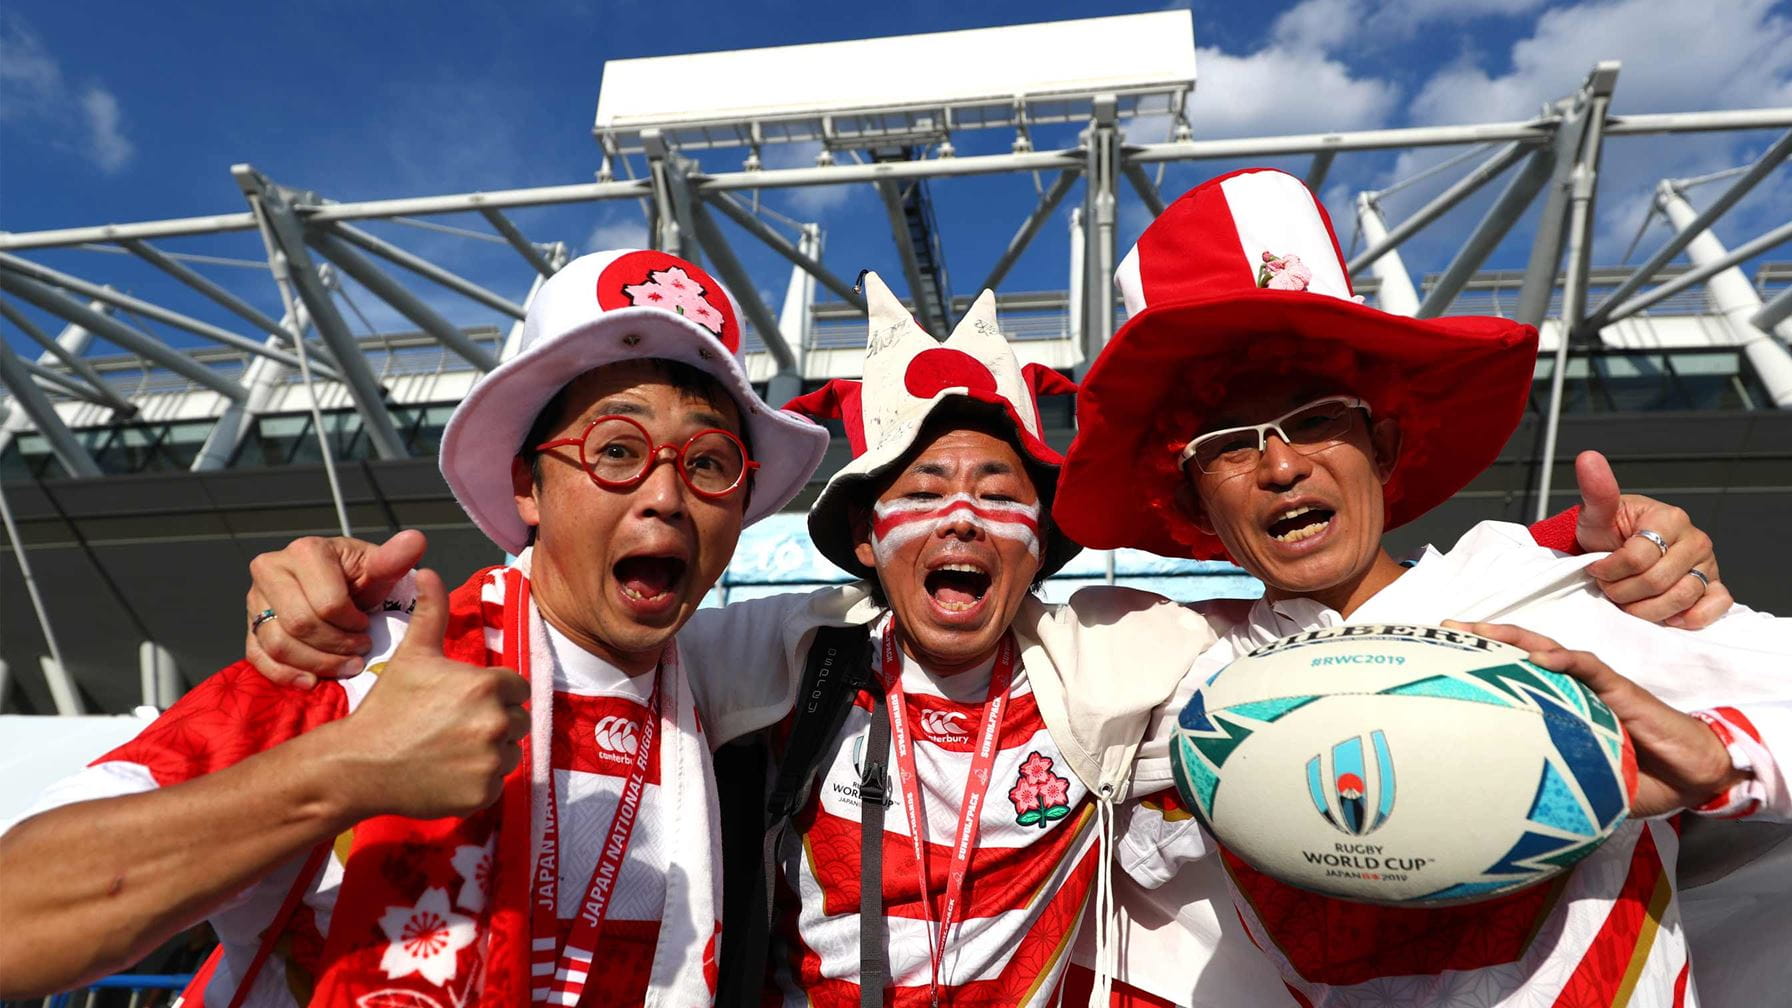 Rugby World Cup - Japan